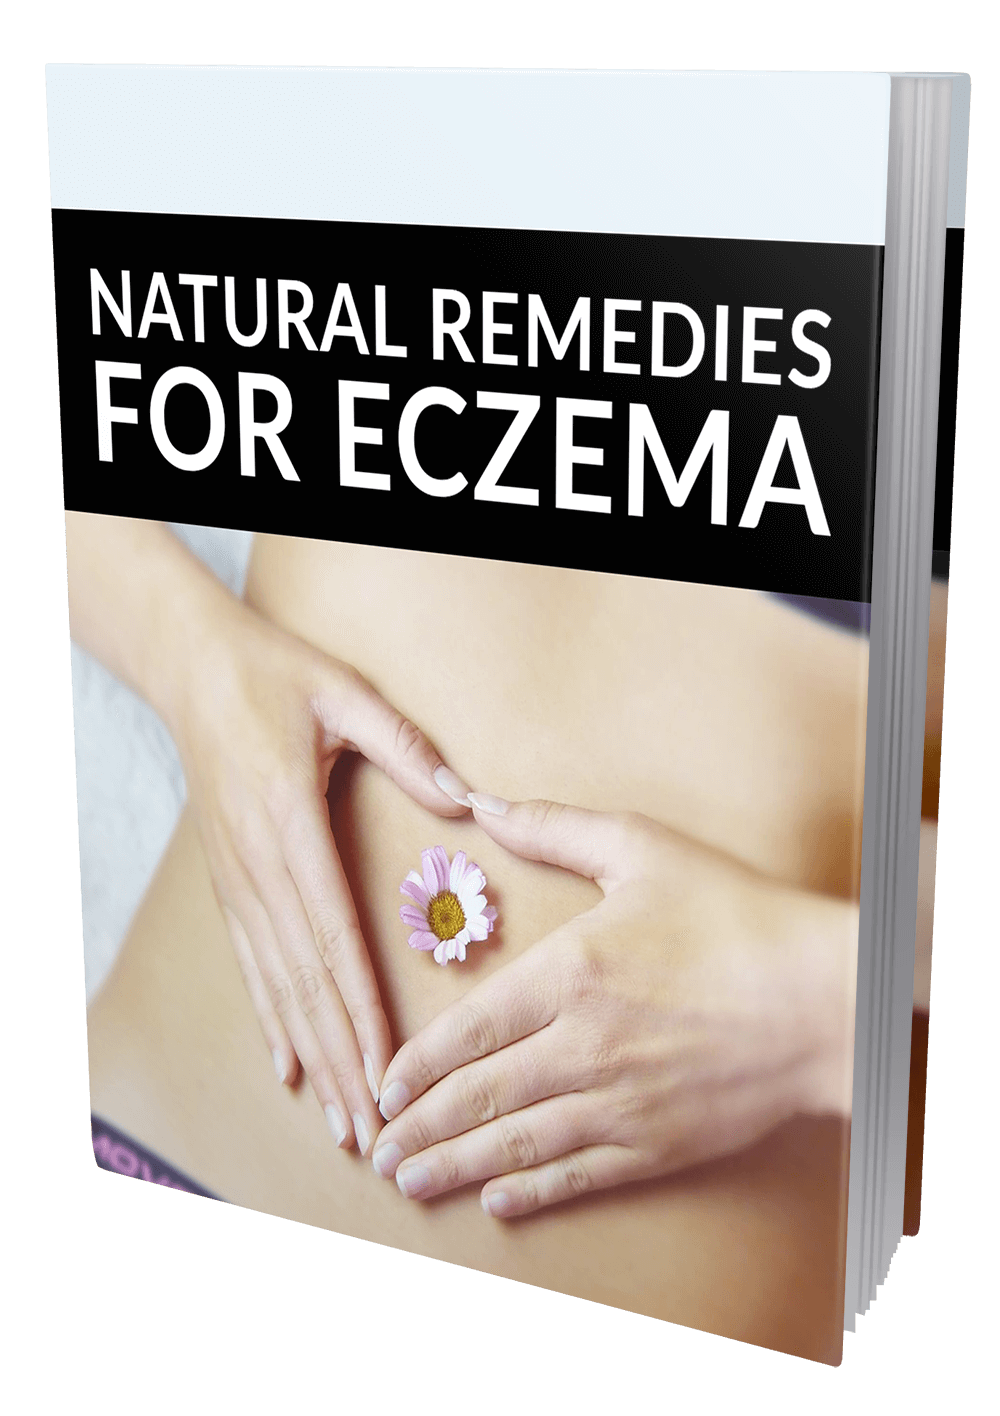 Eczema Fix eBook: Discover The All-Natural Remedies For Eczema Relief!